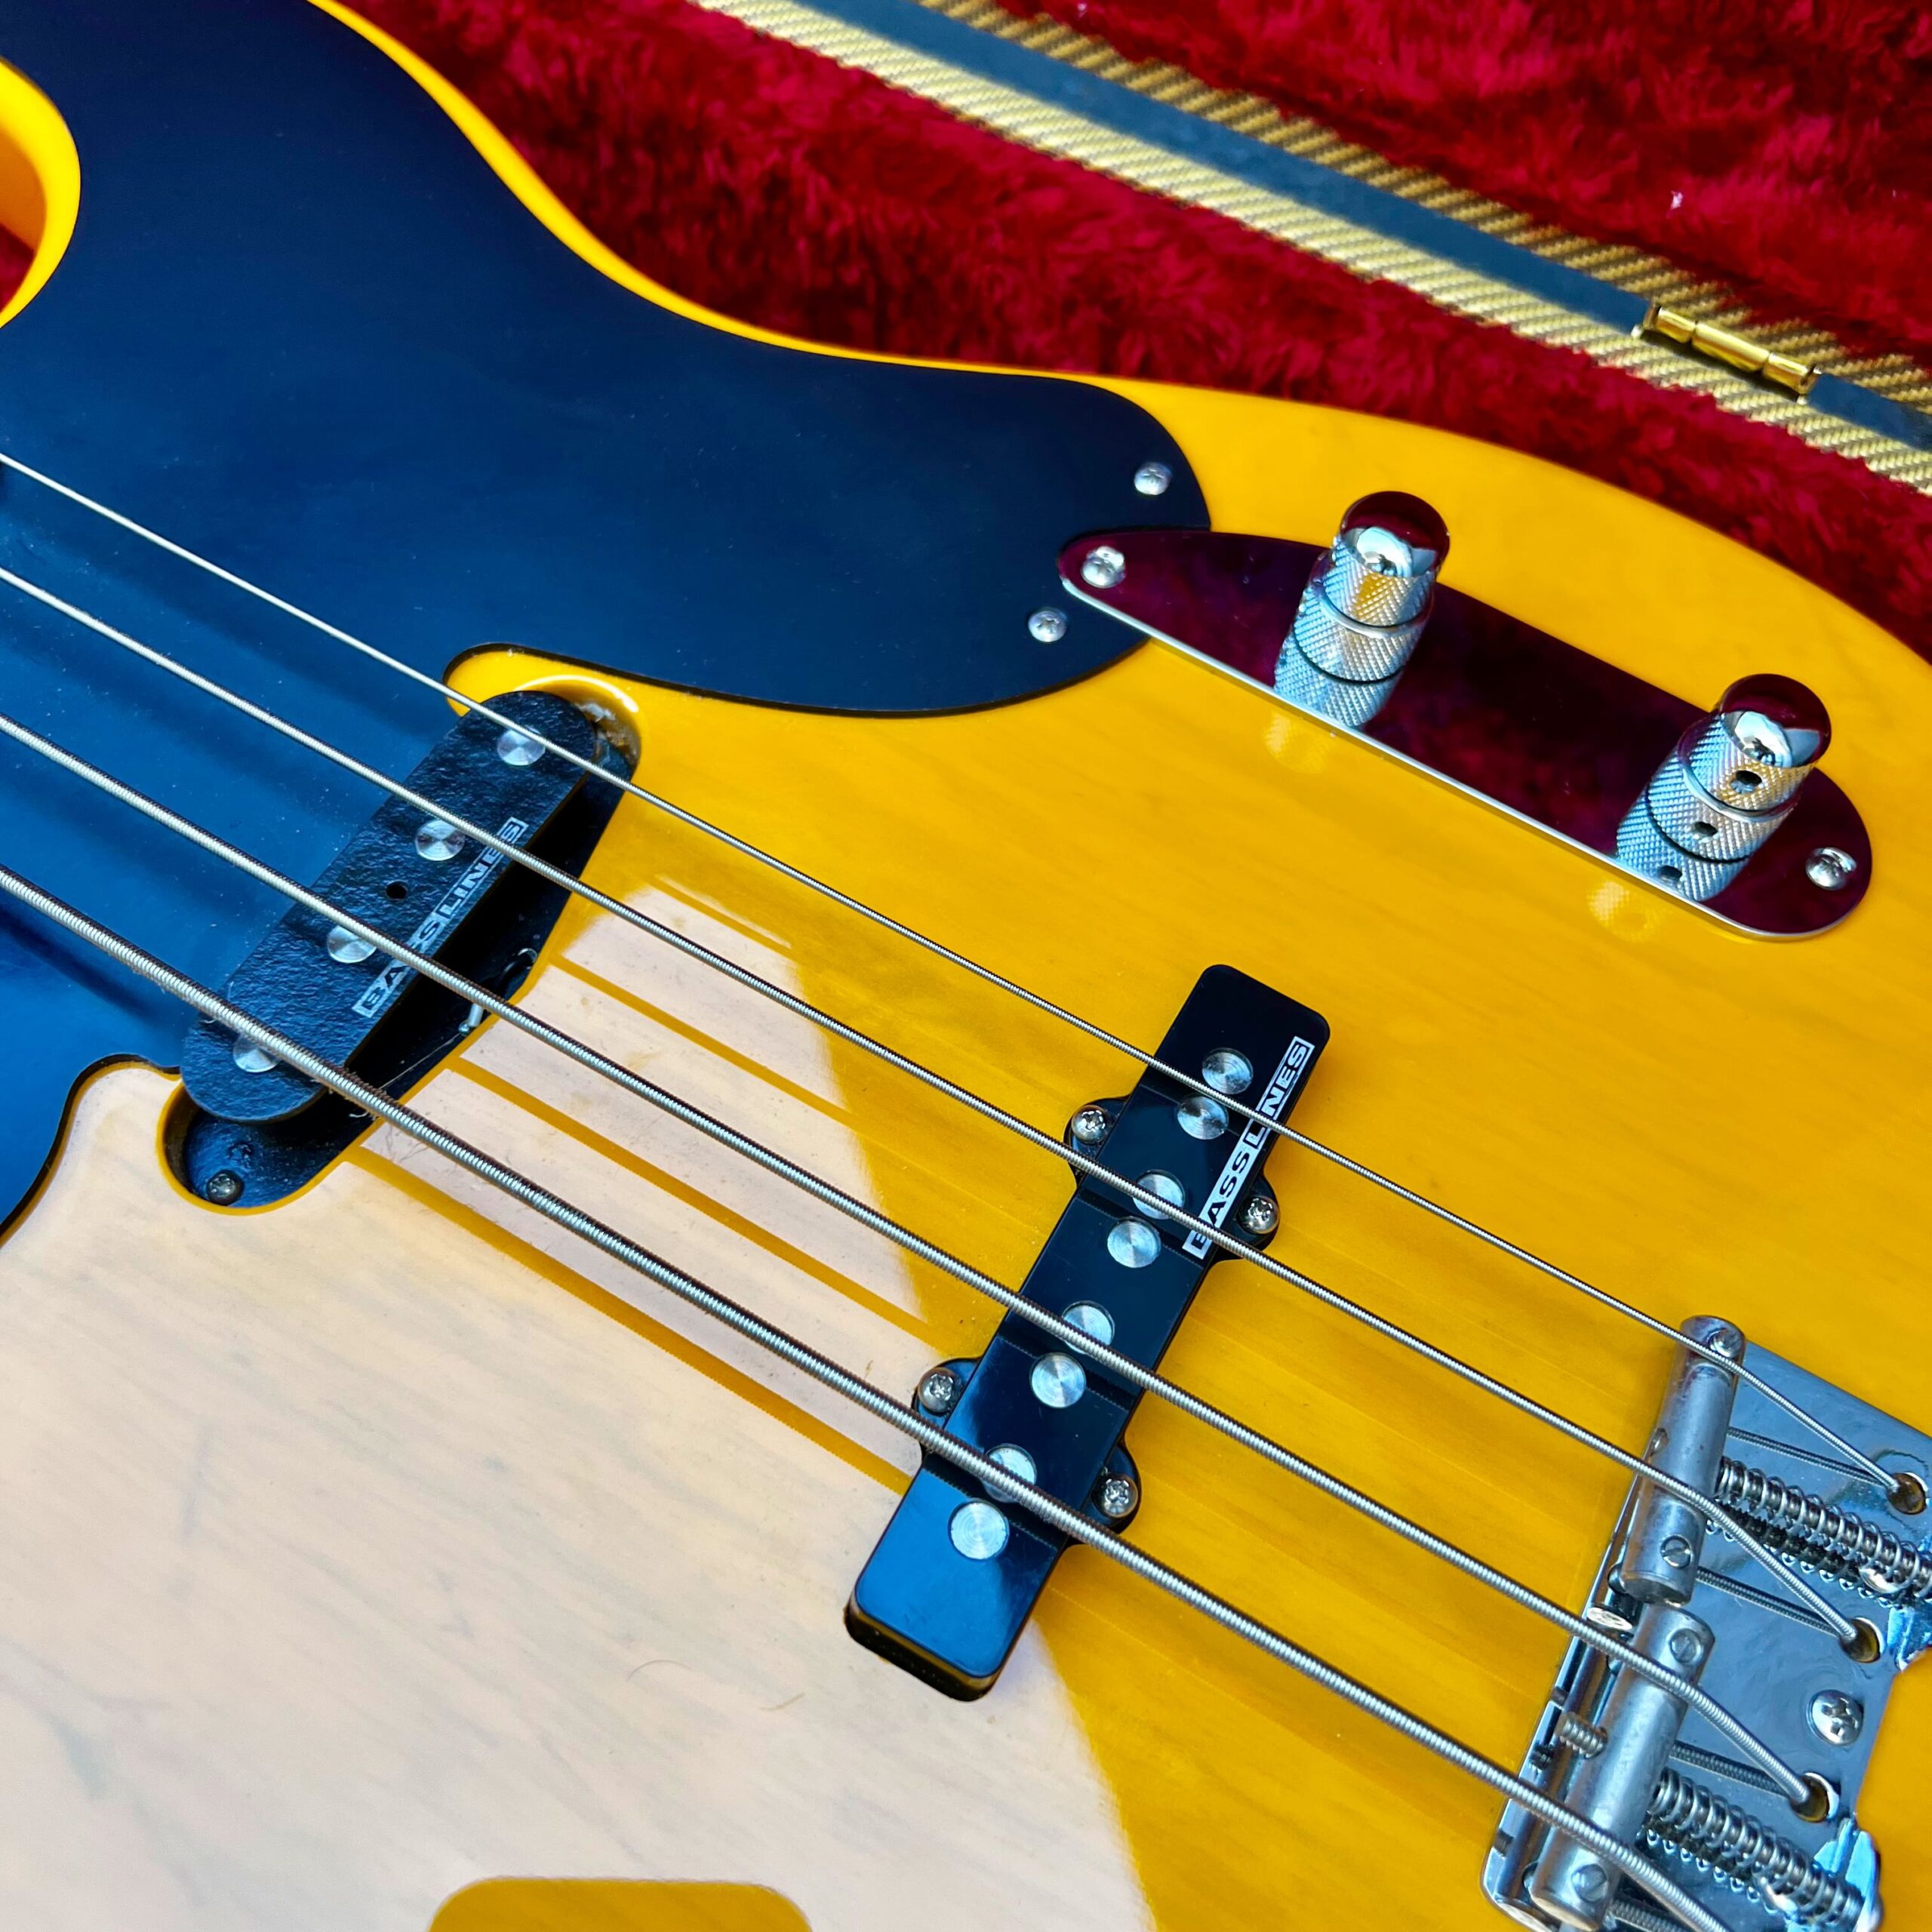 Fender '51 Precision Bass Vintage Reissue OPB-51 (Crafted in Japan